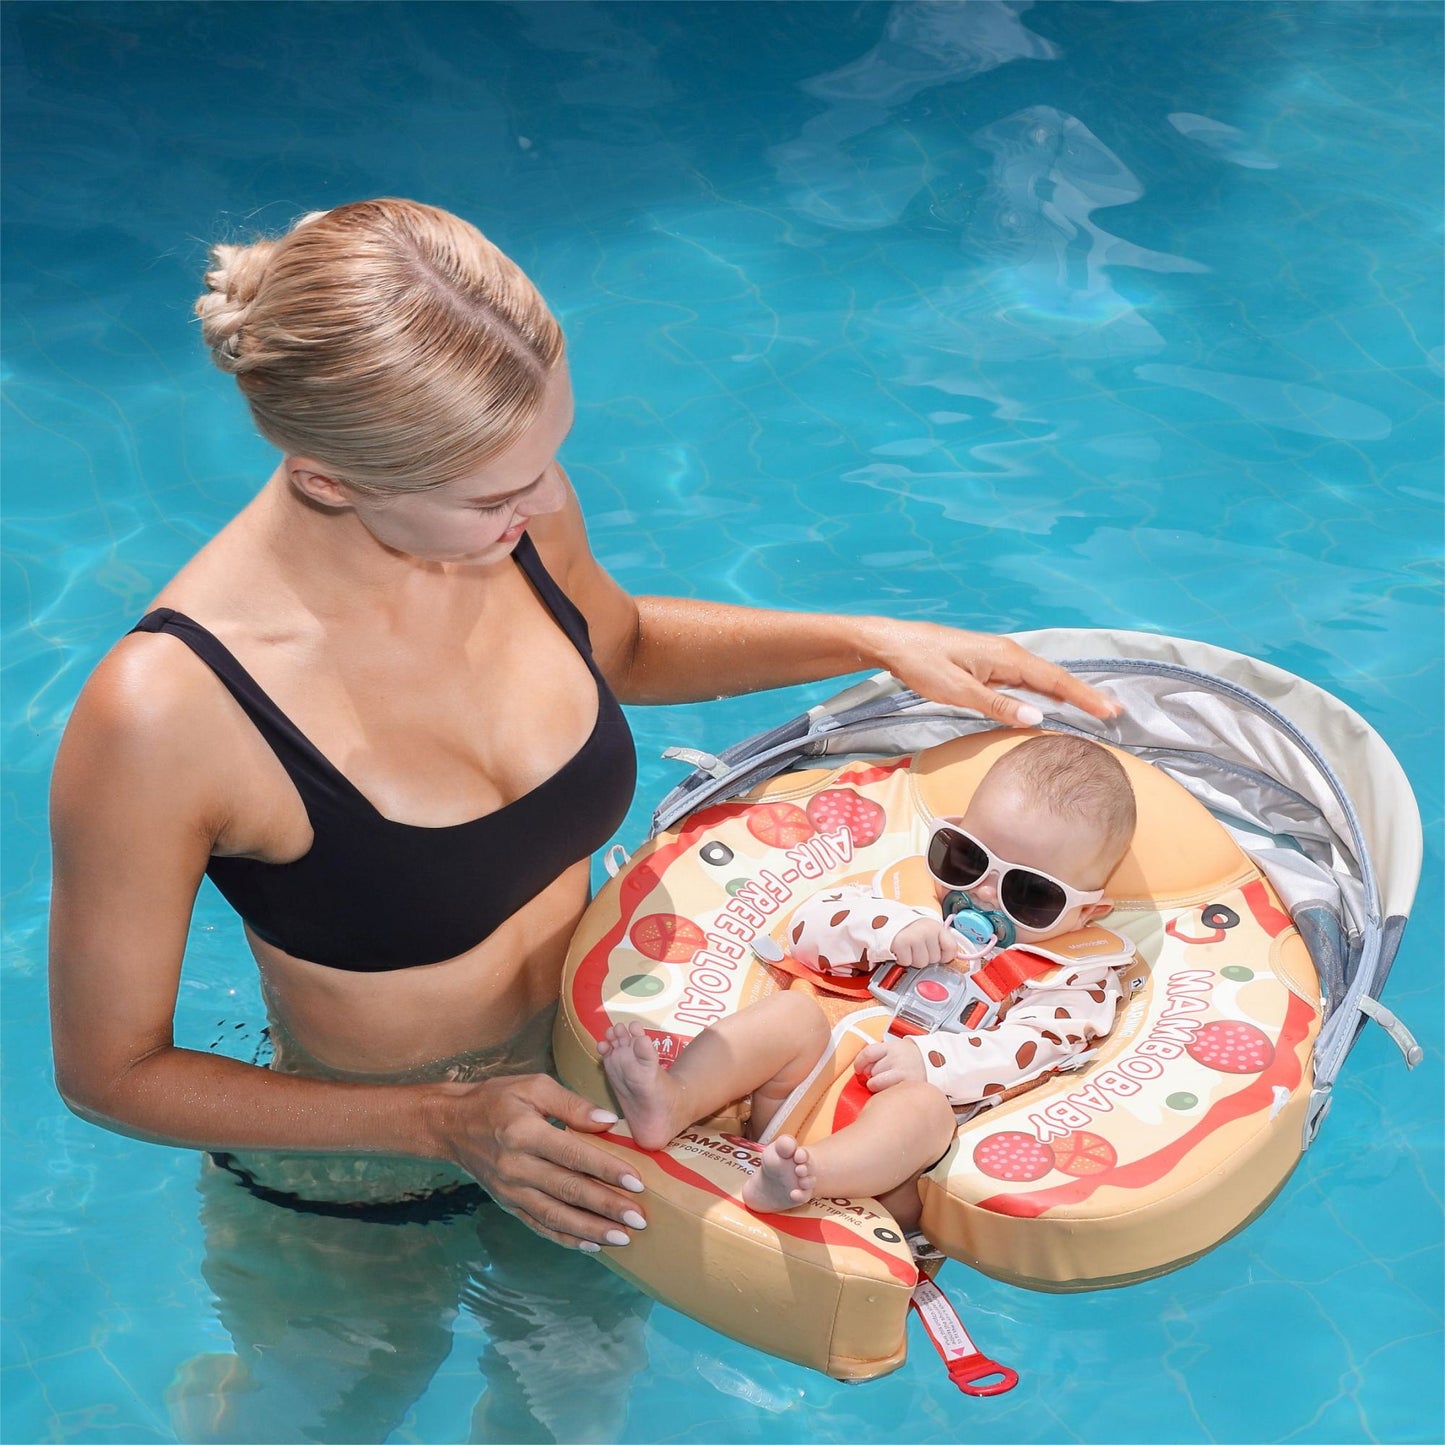 Mambobaby Swim Float with Canopy for Infants Pizza